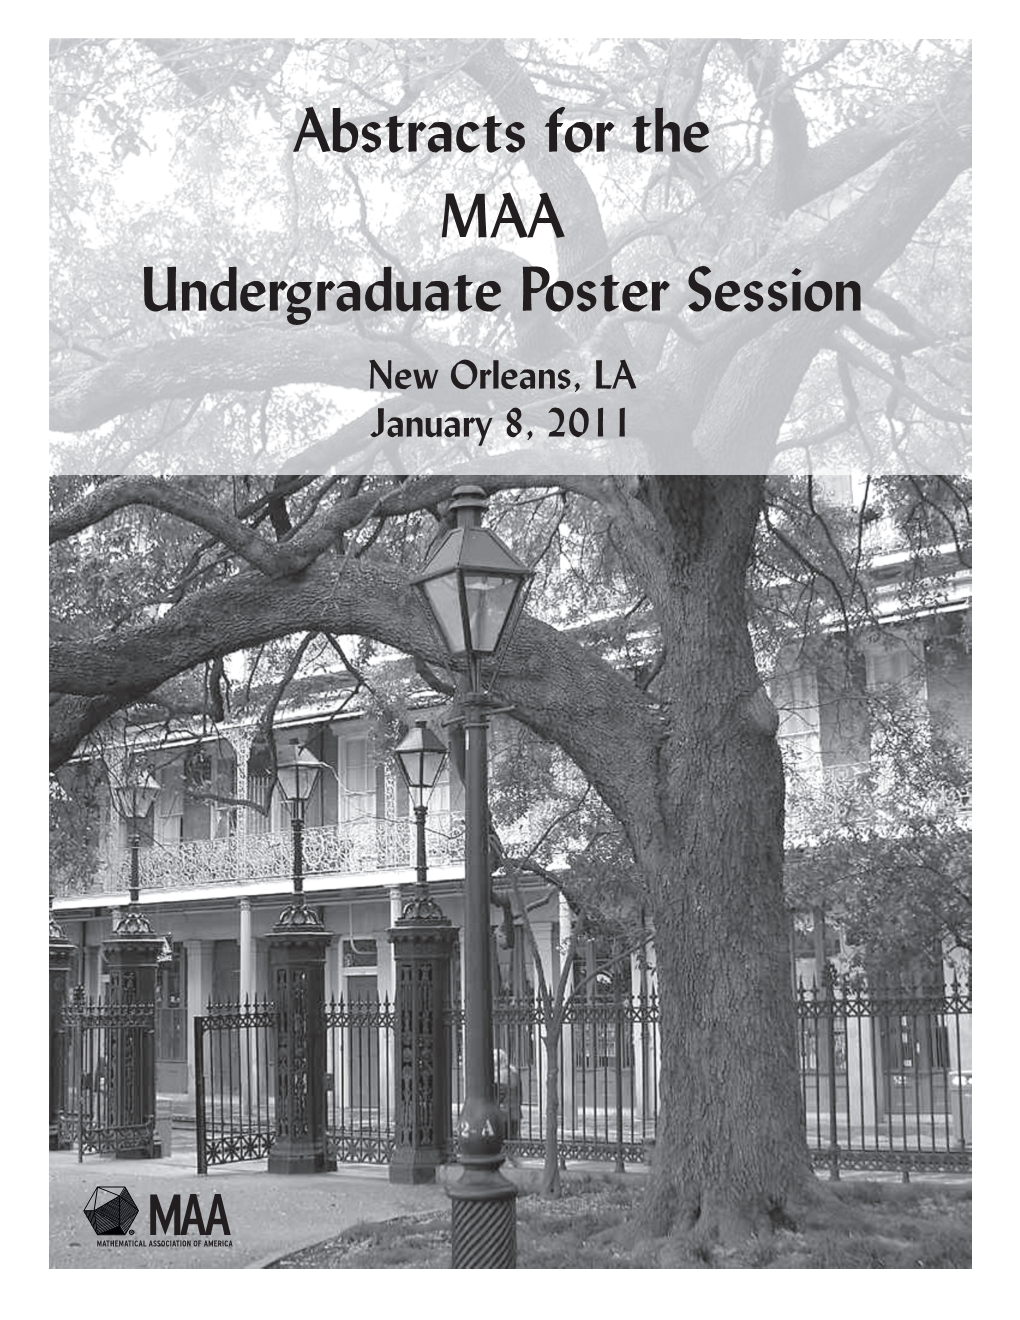 Abstracts for the MAA Undergraduate Poster Session New Orleans, LA January 8, 2011